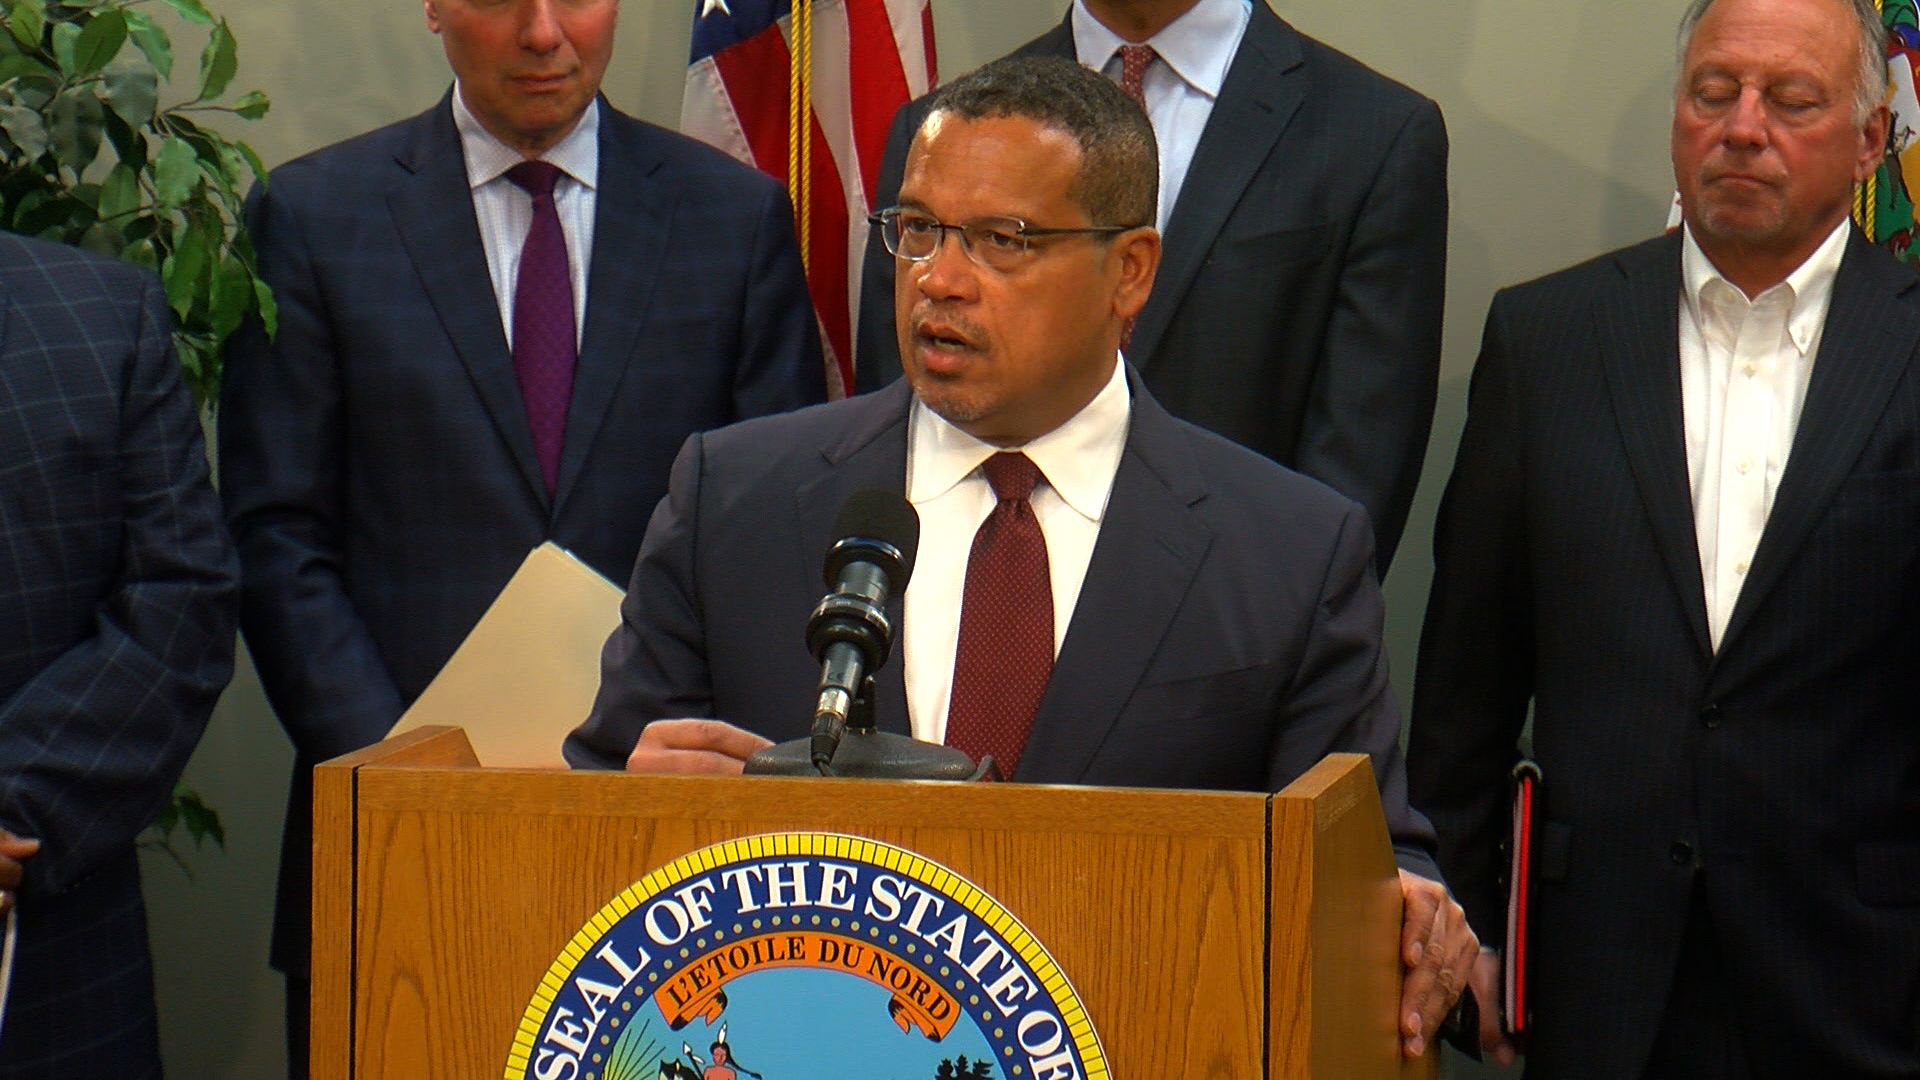 Attorney General Keith Ellison To Co-Prosecute George Floyd Case With Hennepin County Attorney Mike Freeman - CBS Minnesota